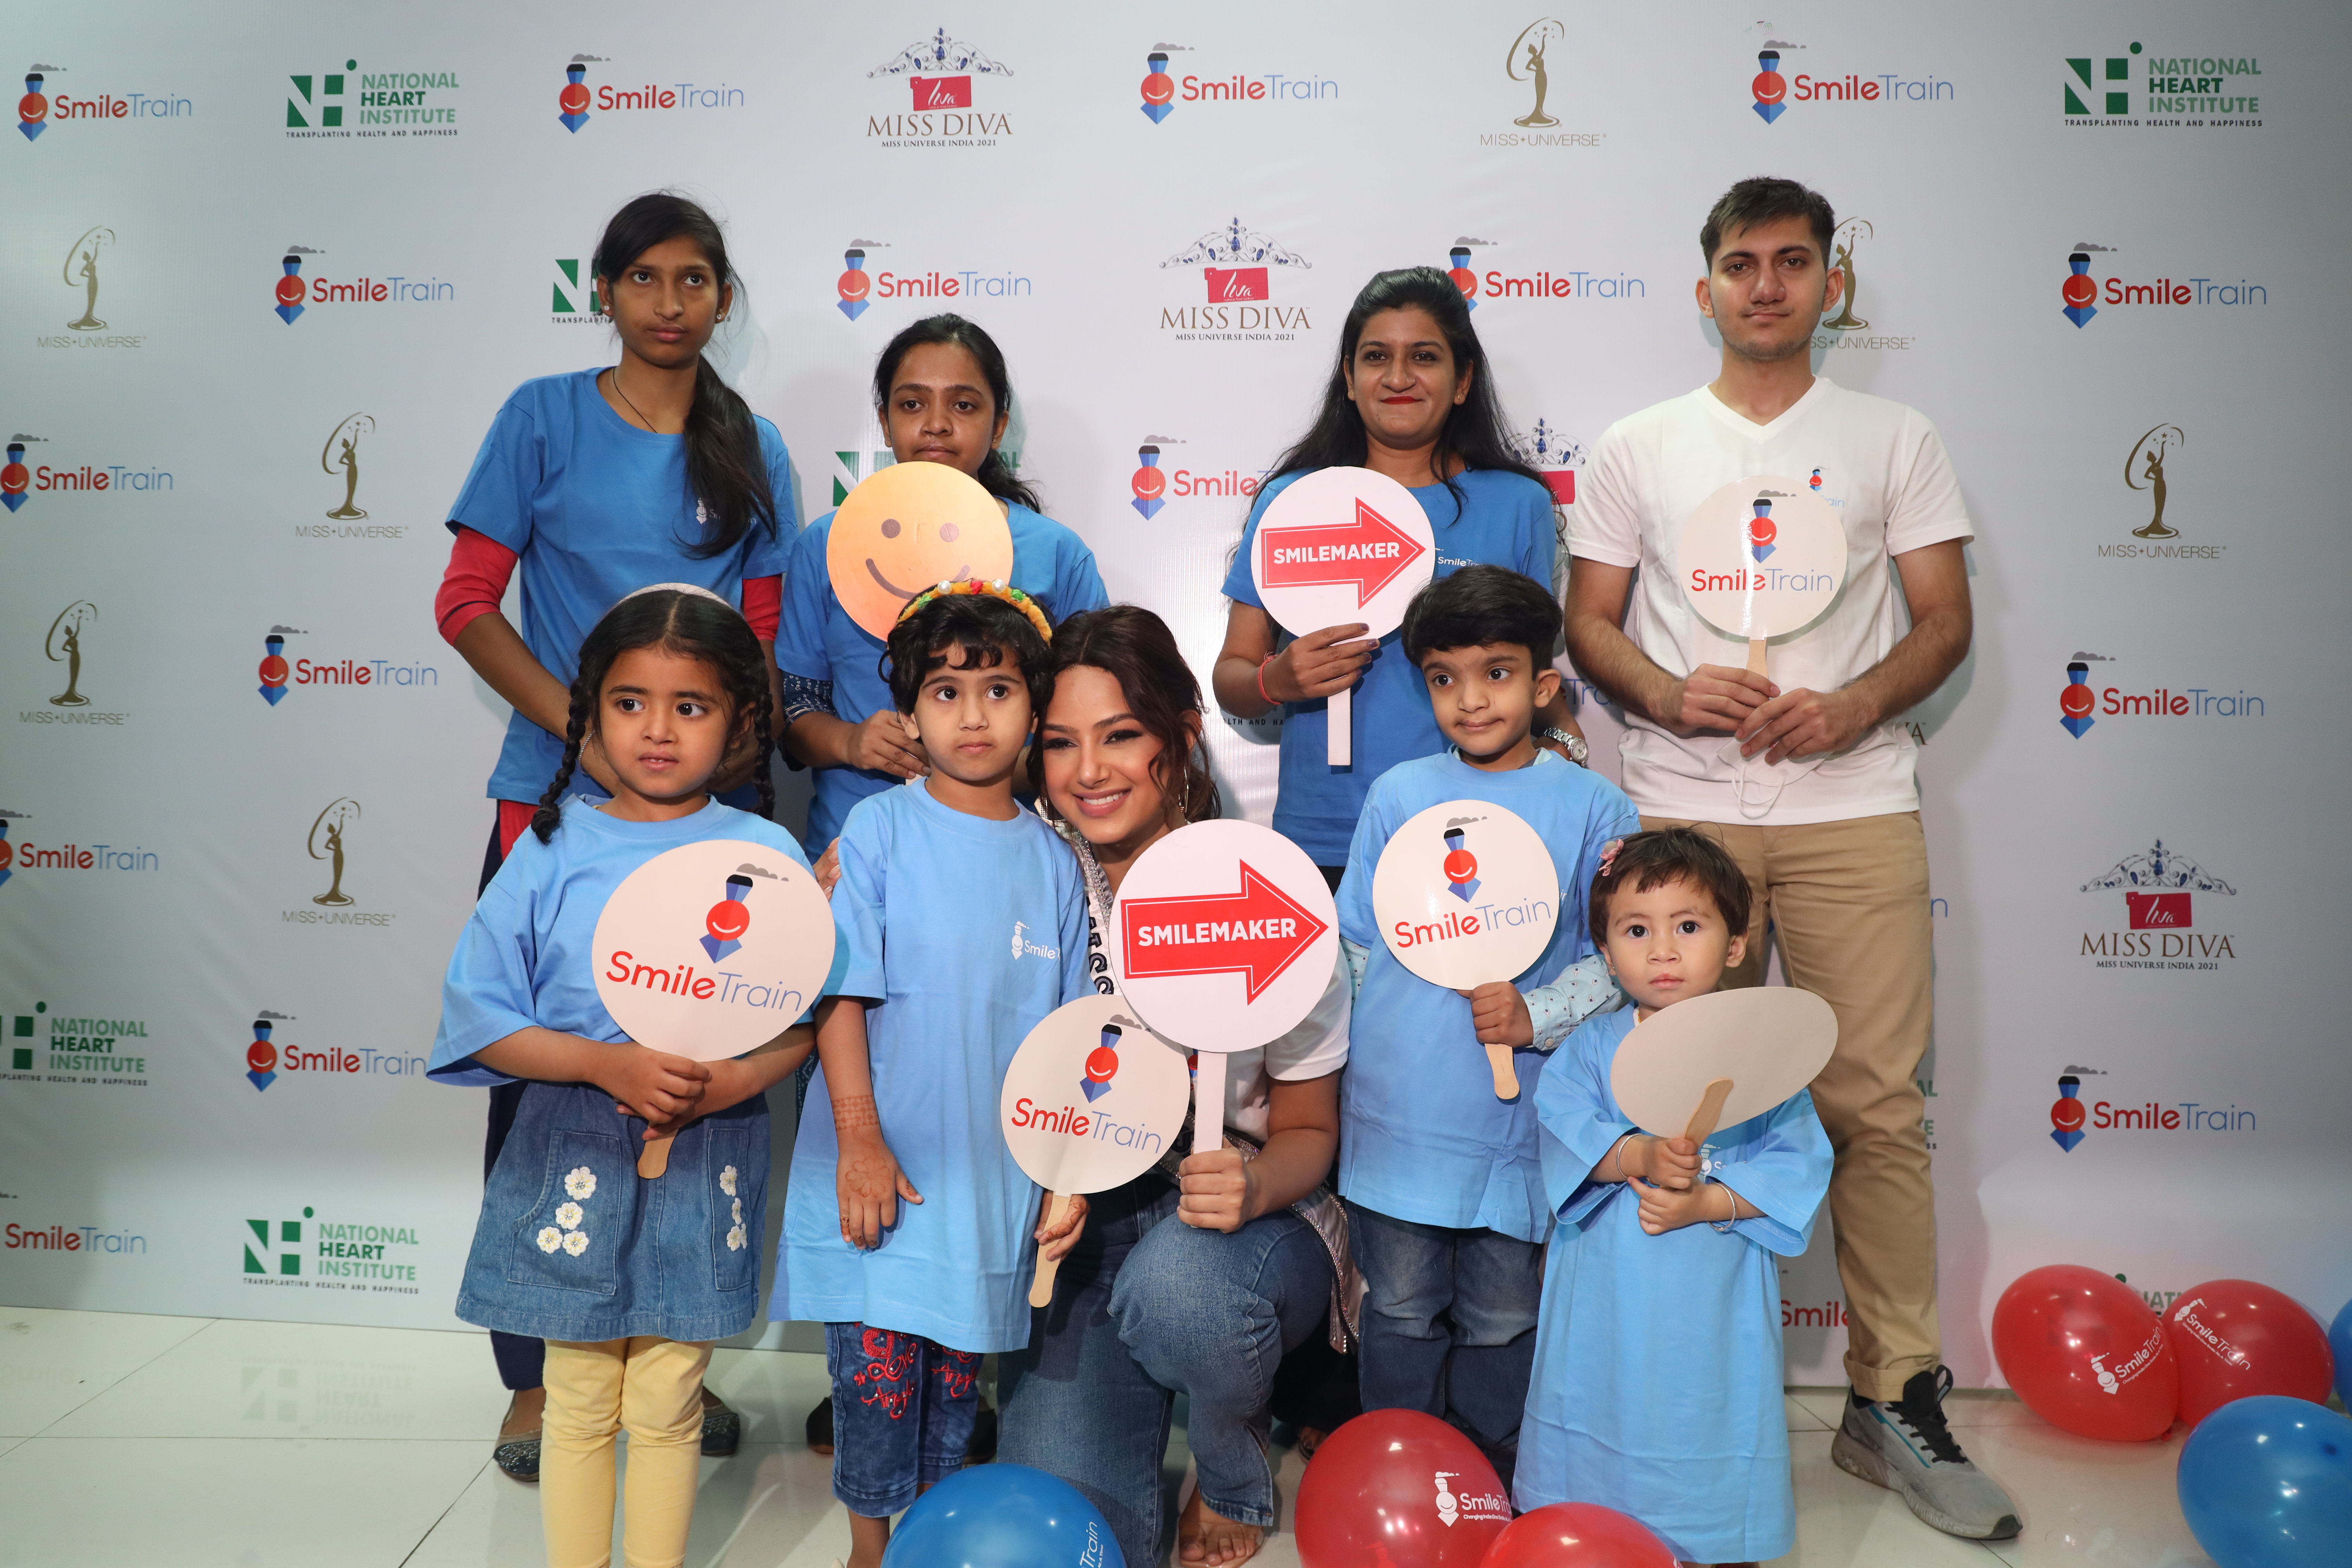 Harnaaz Sandhu smiling with patients and holding Smile Train signs